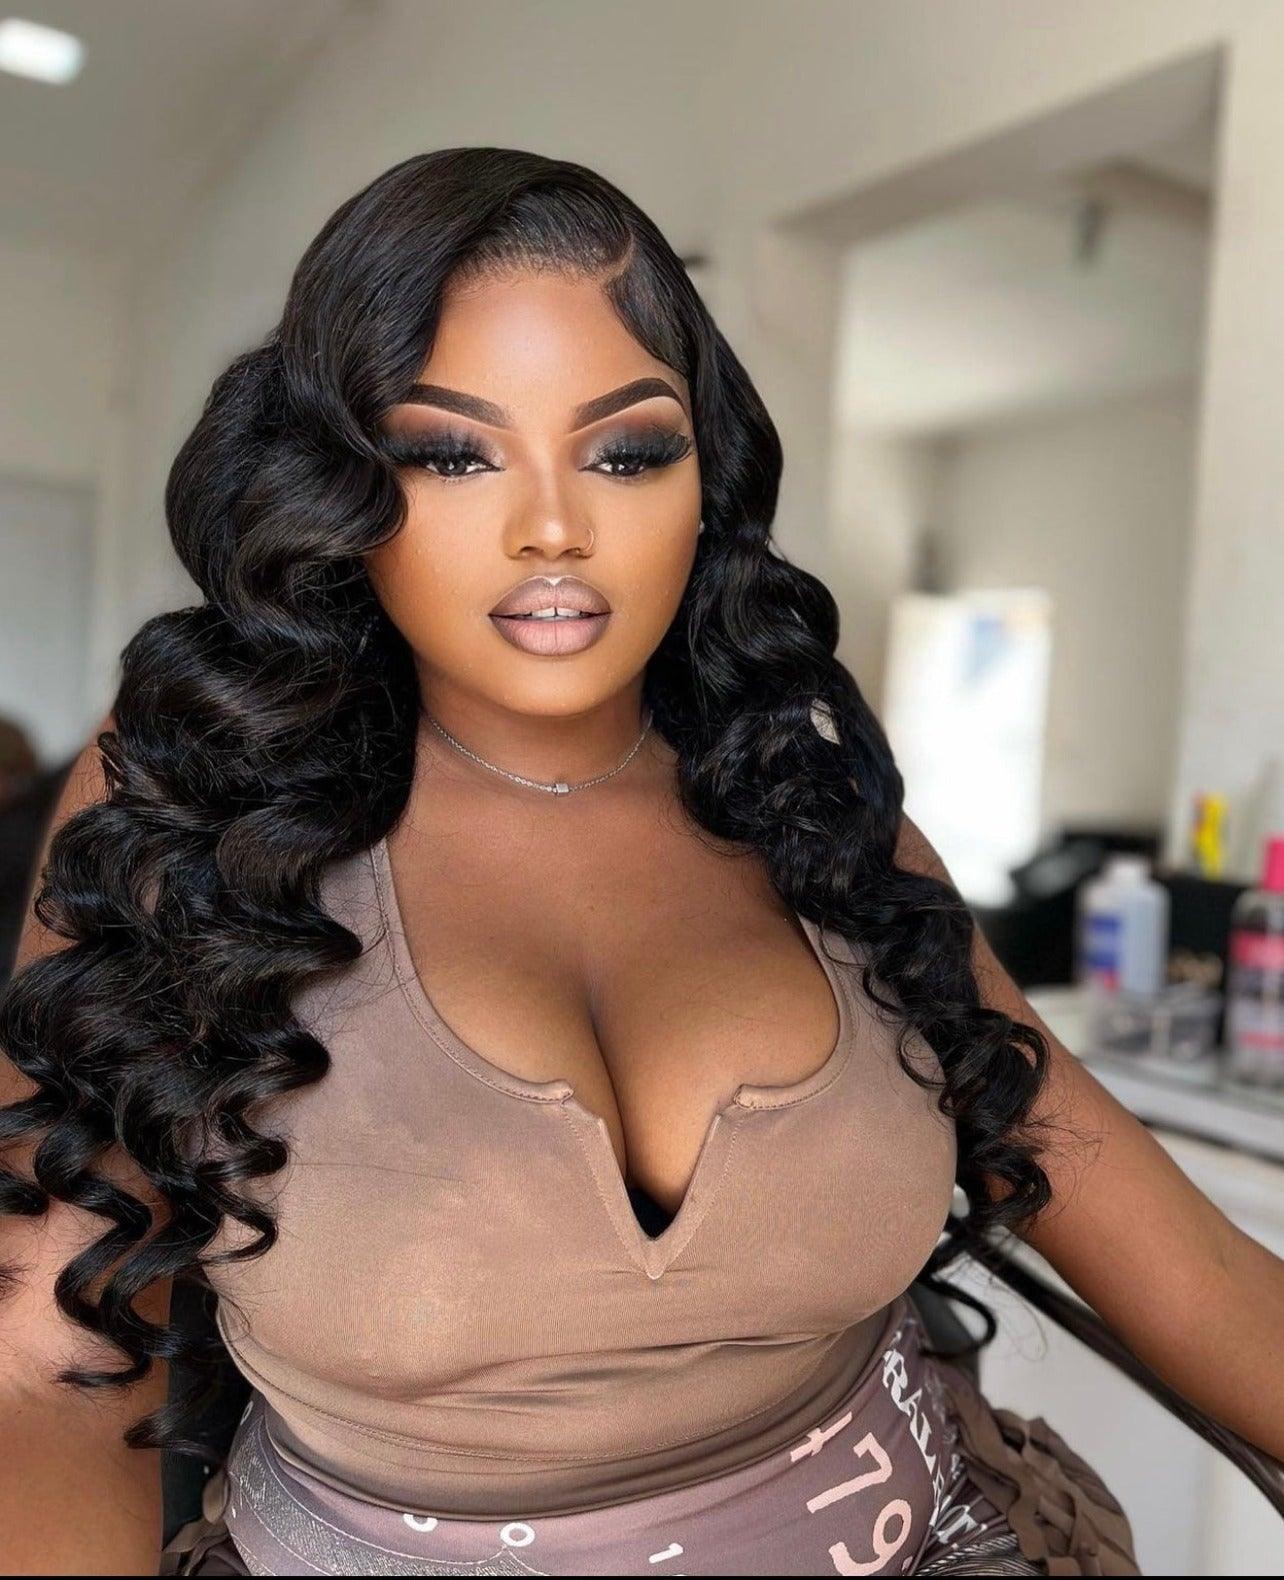 The Body Wave Hair Hairstyles in 4 Fresh and Different Ways